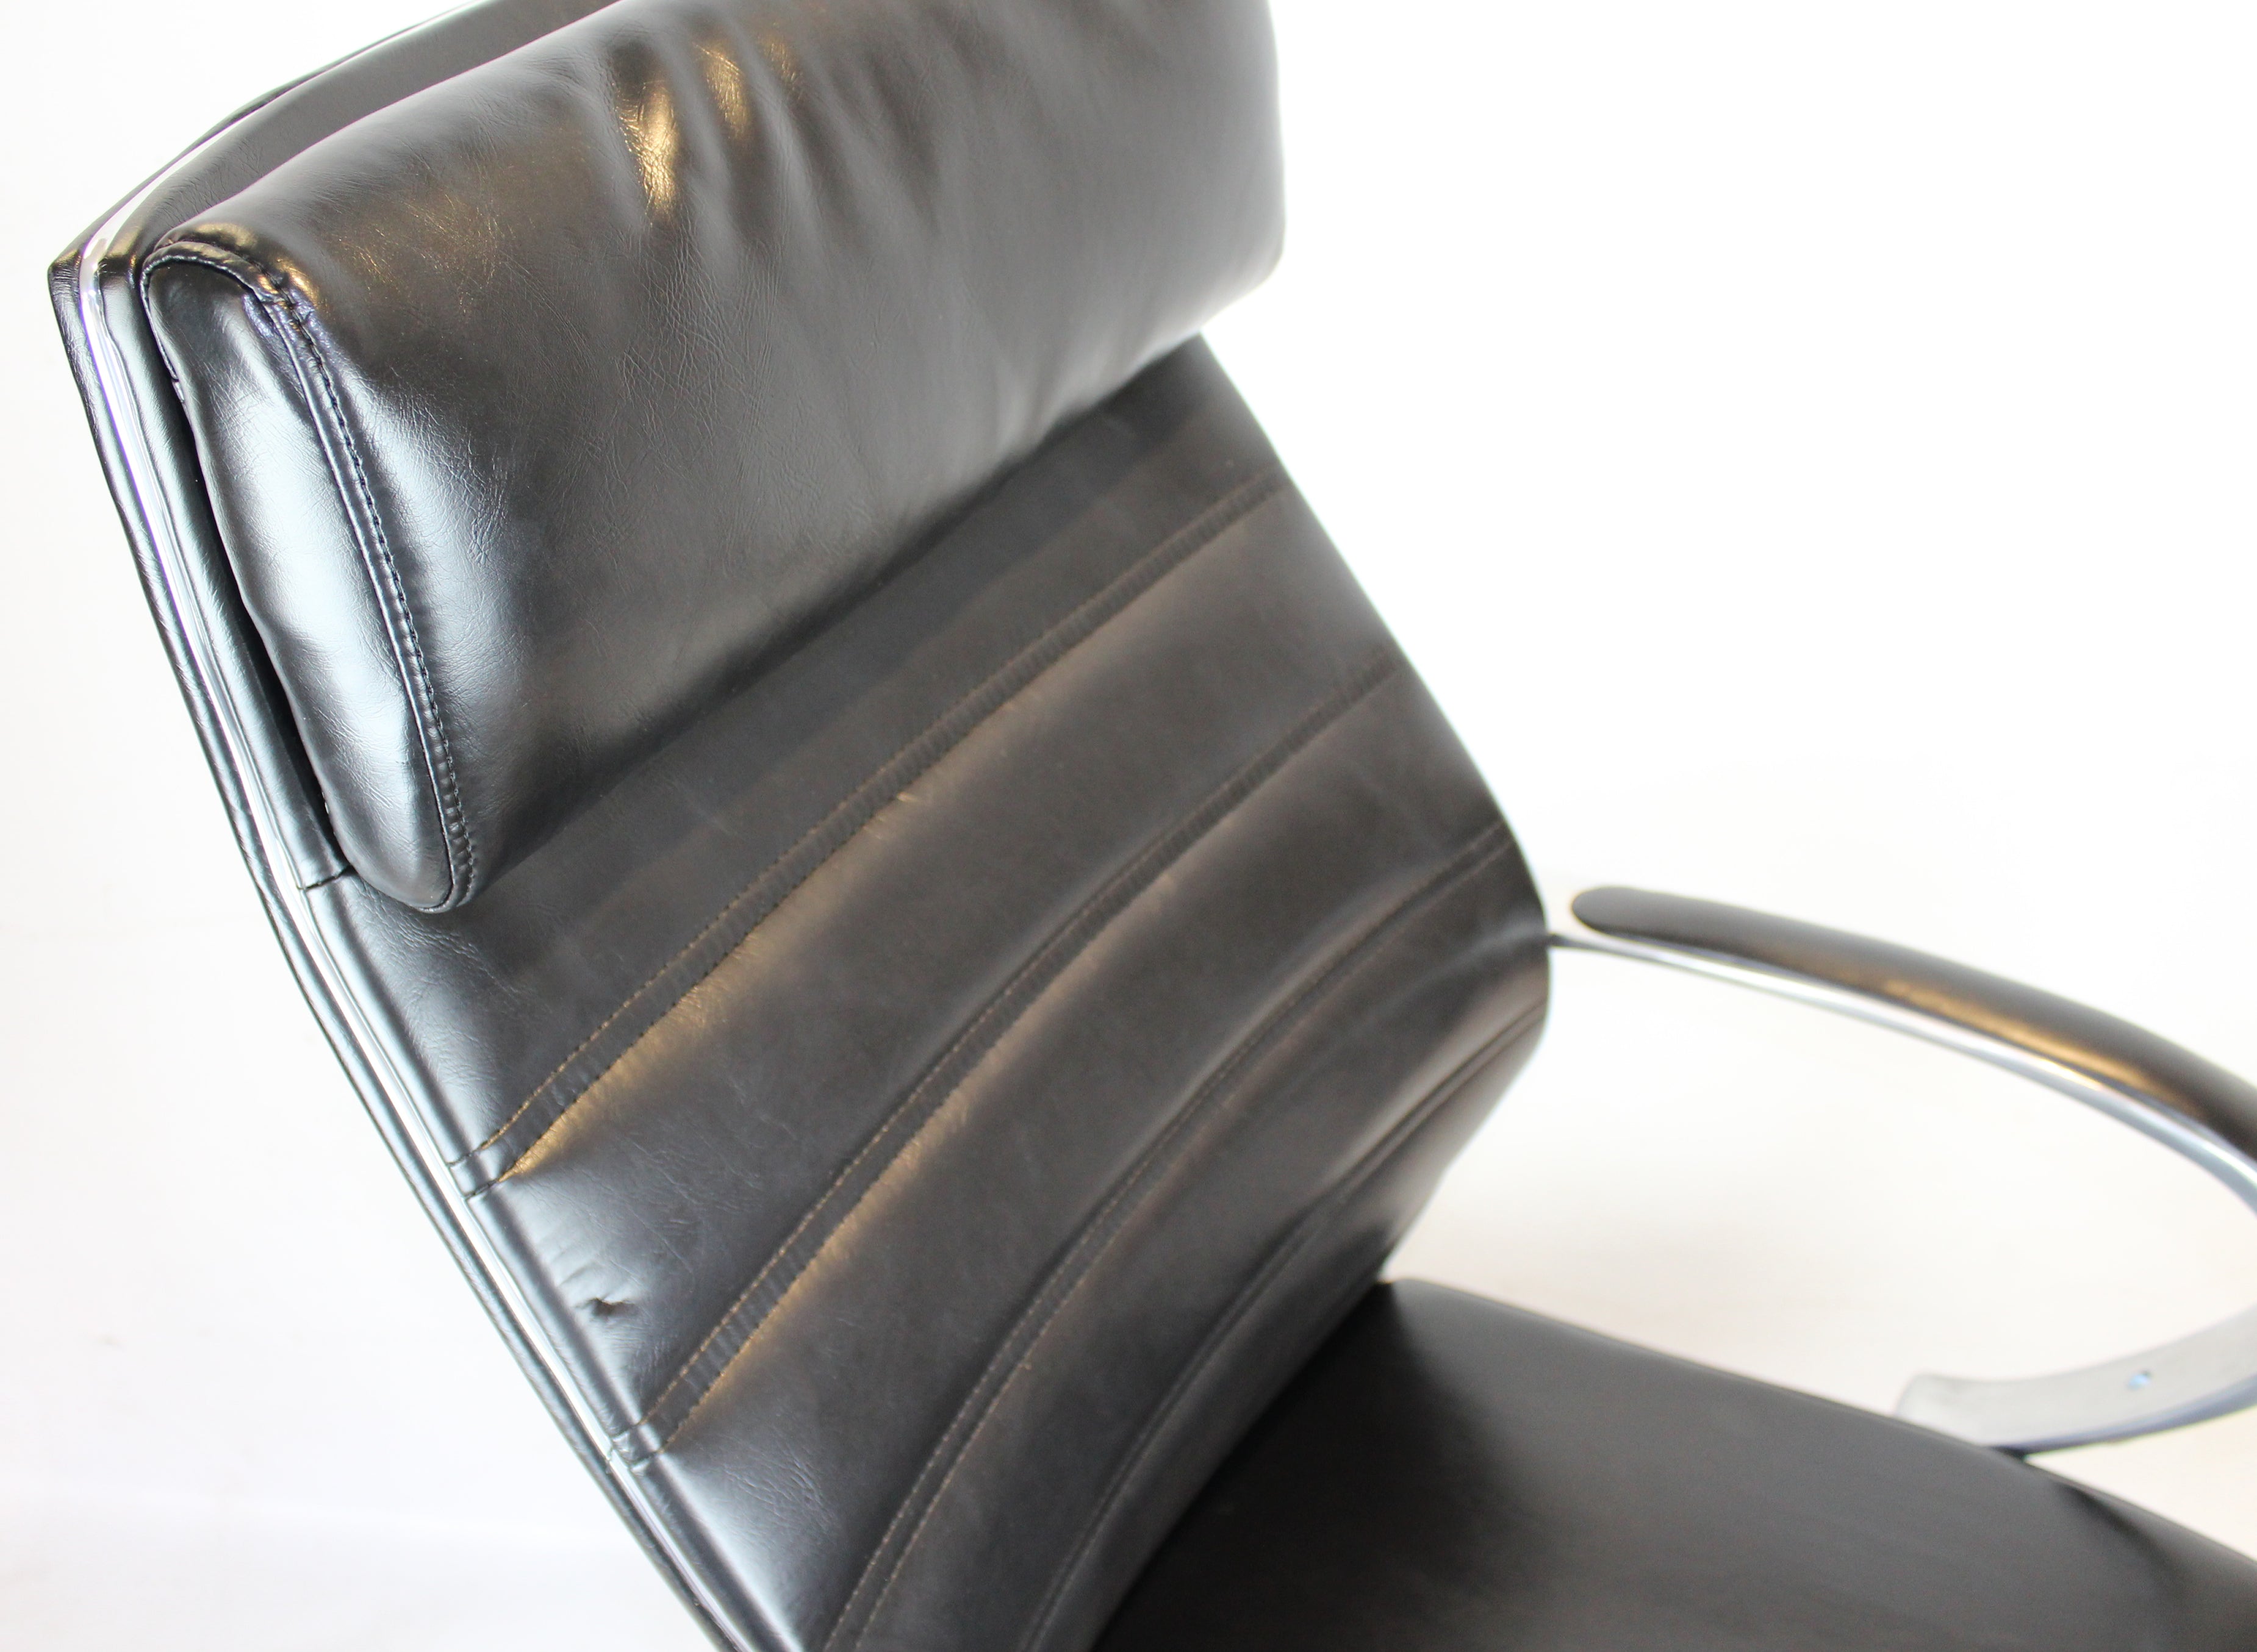 Modern Executive Office Chair in Black - DH-102